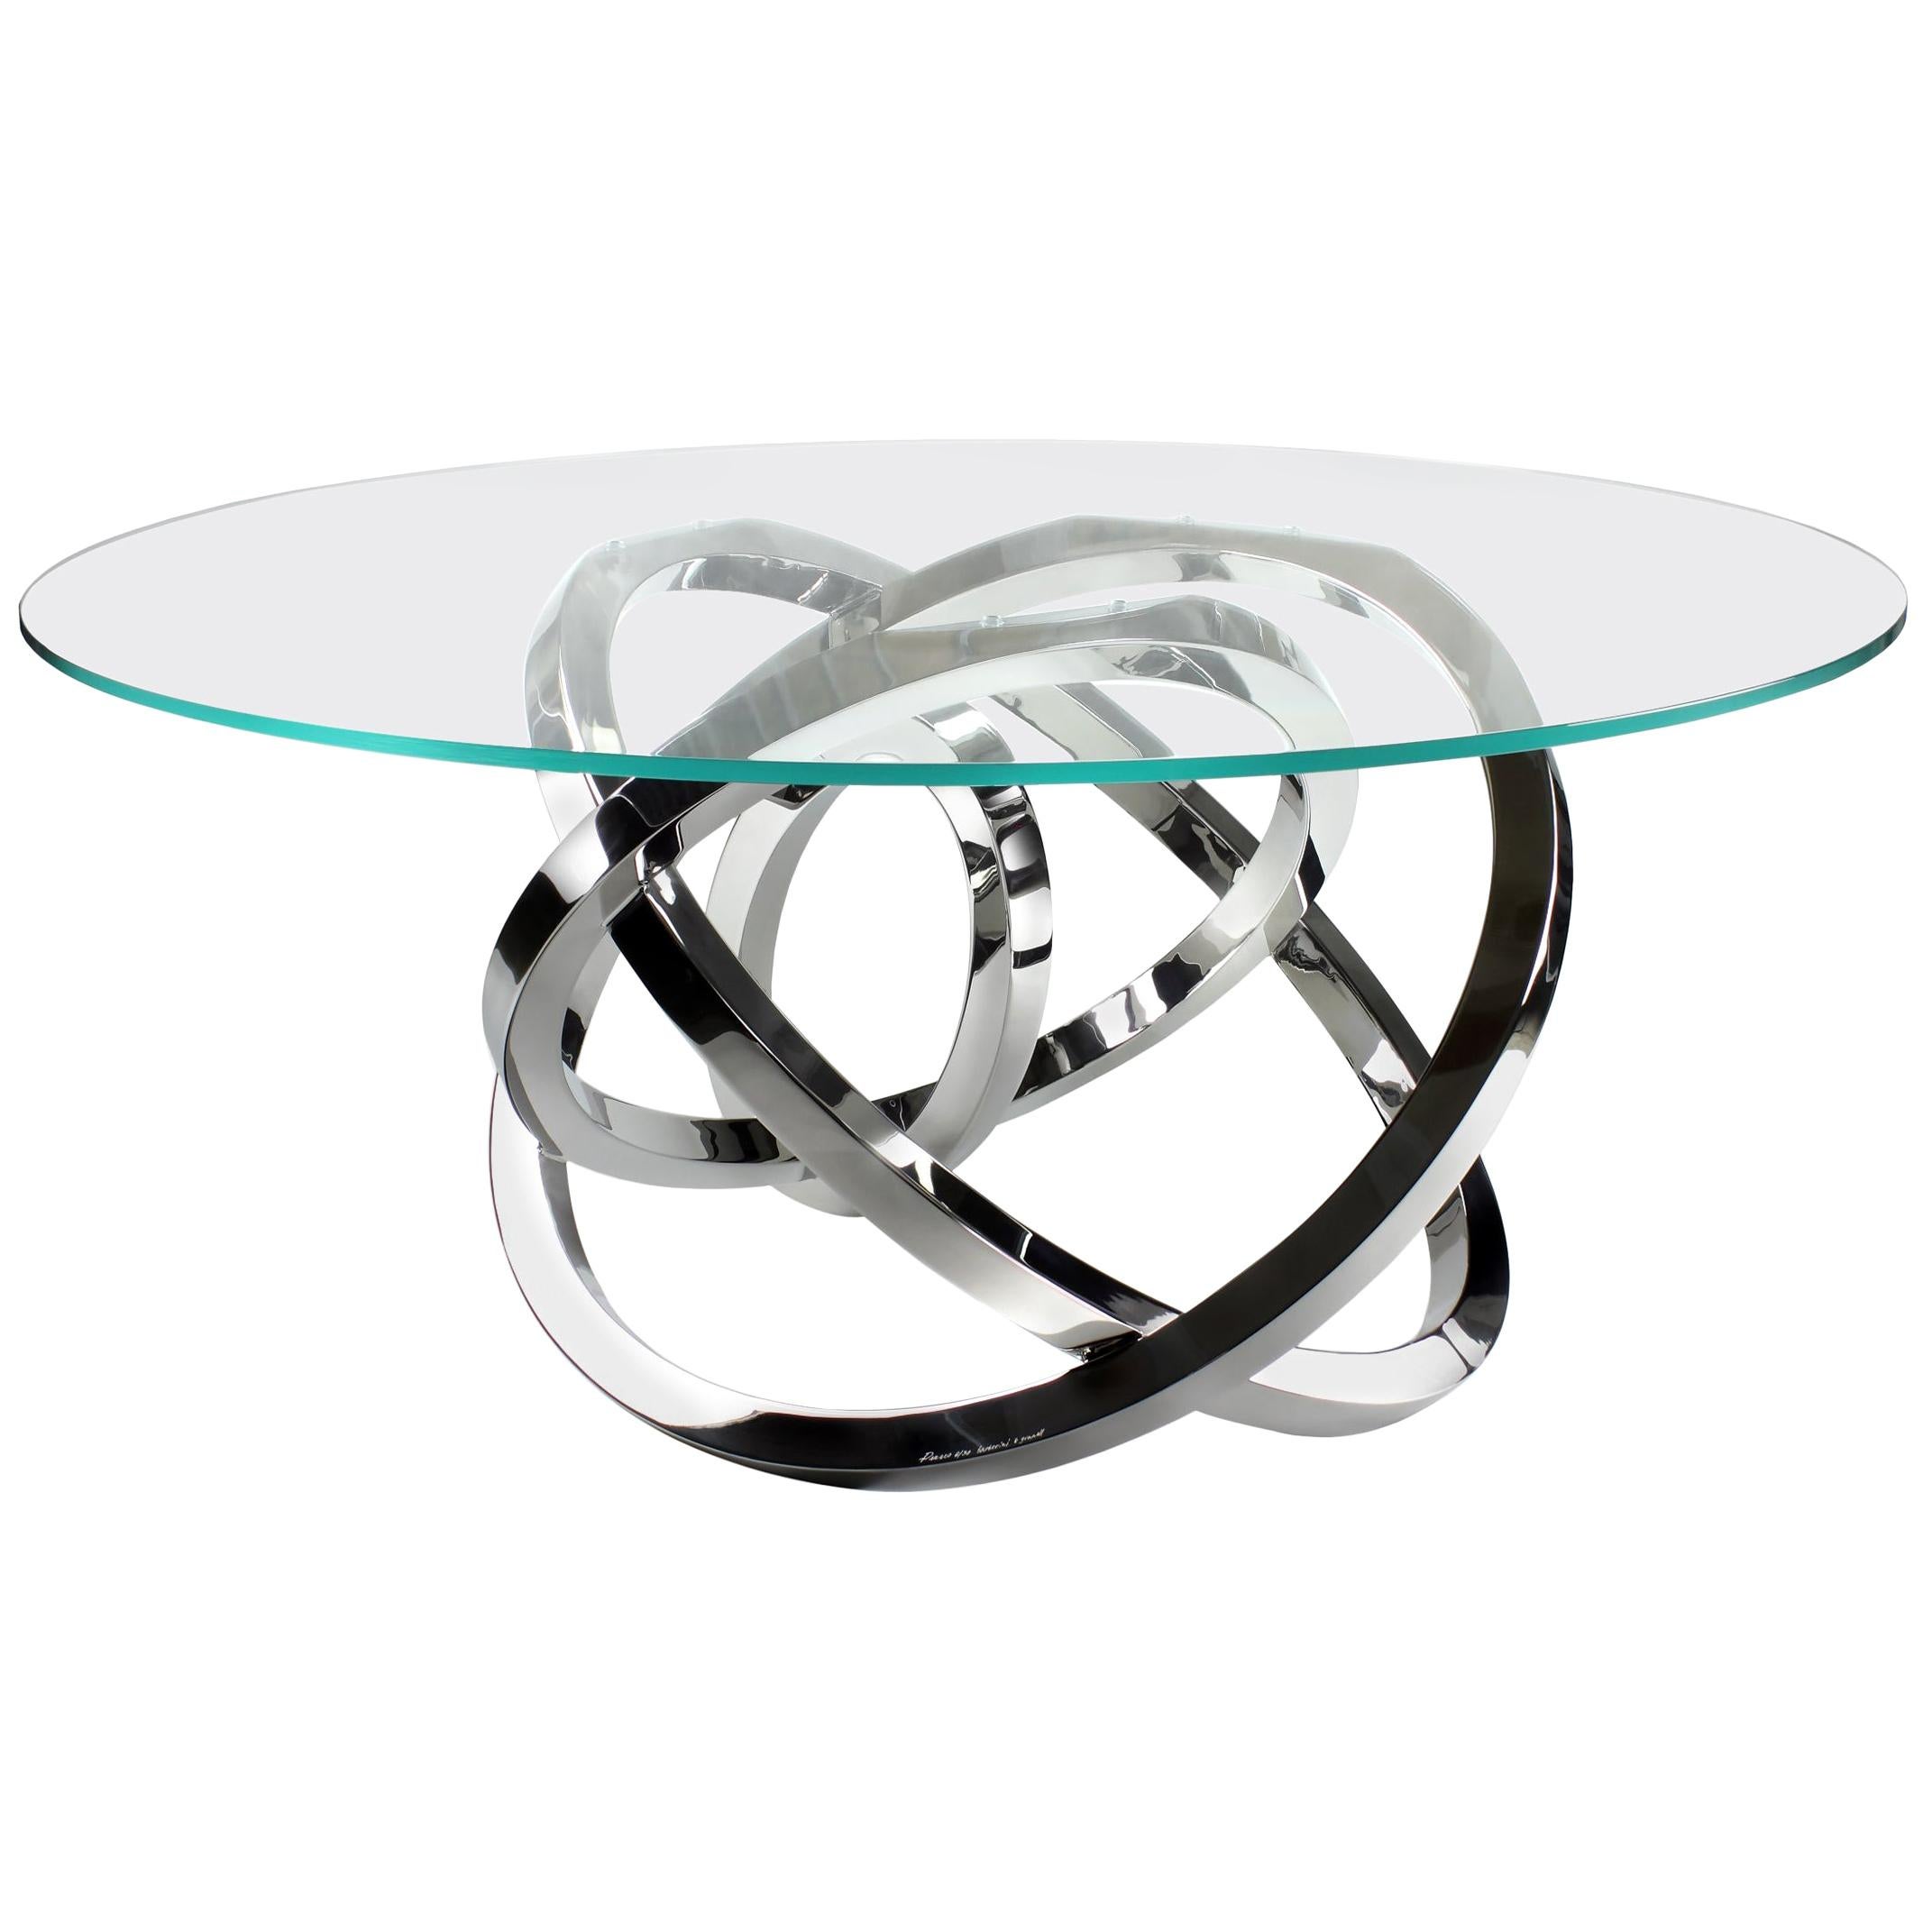 Dining Table Circular Mirror Steel Glass Crystal Collectible Design Handmade For Sale